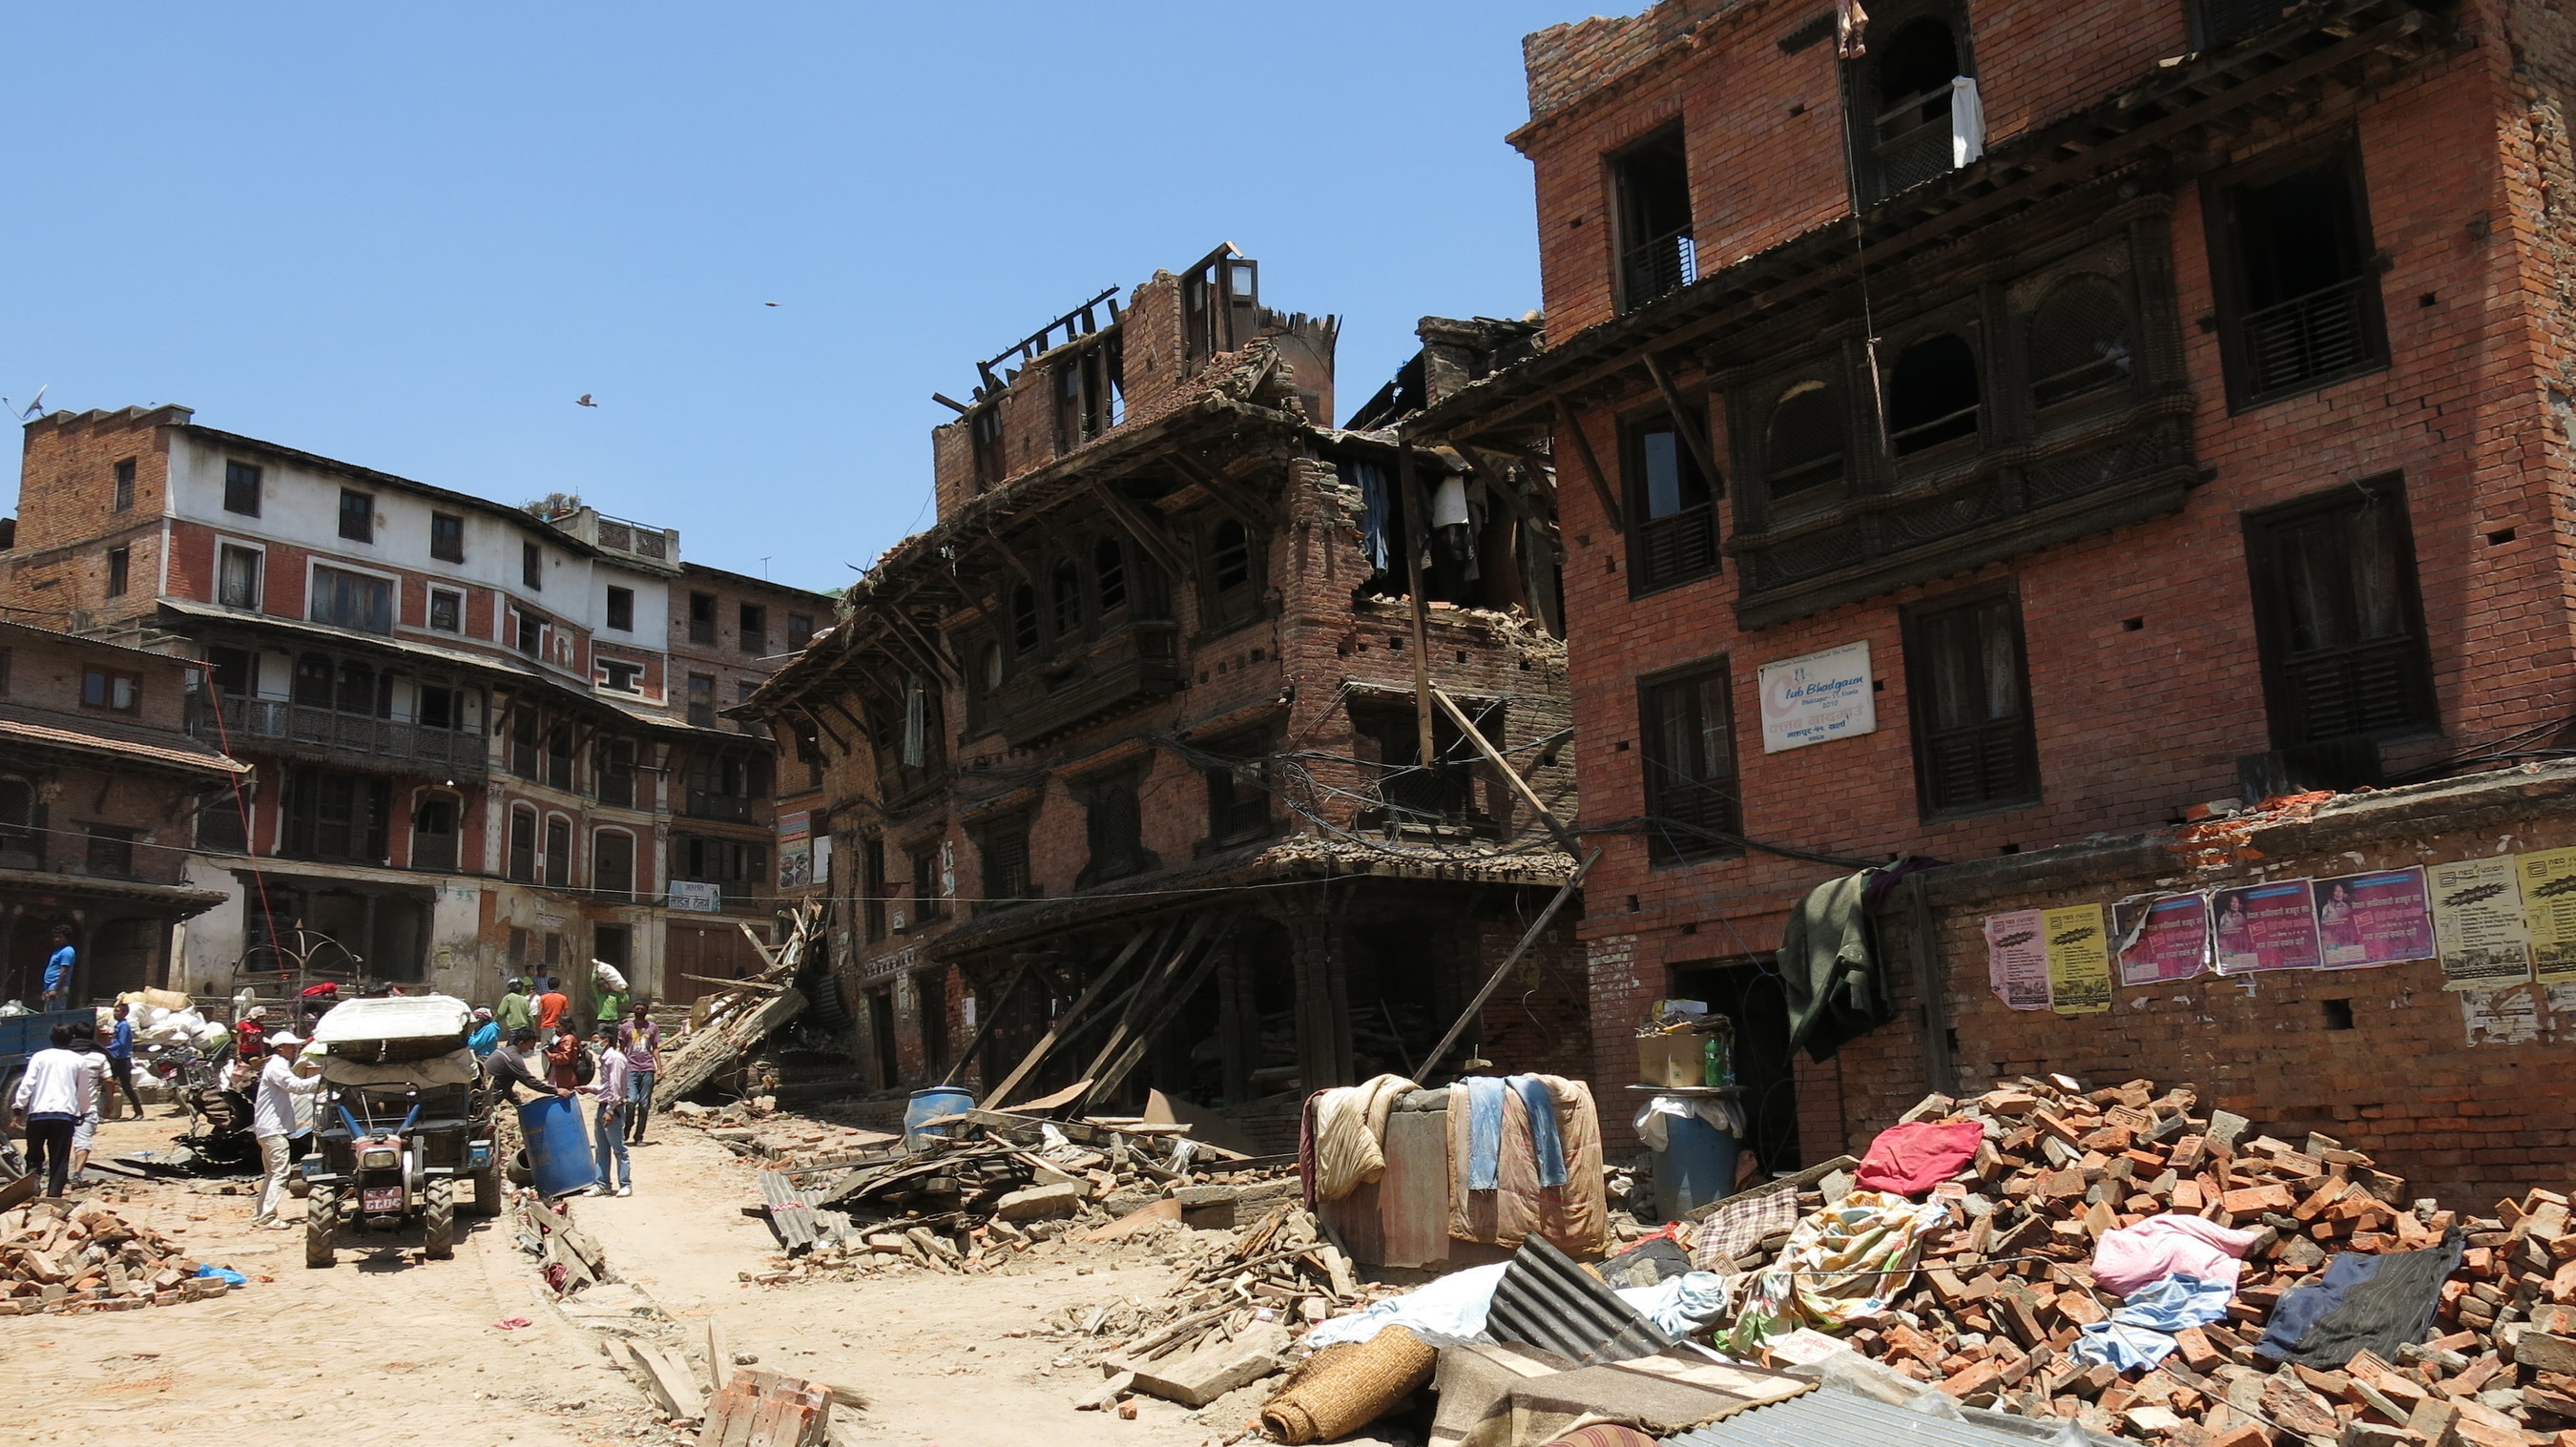 Image from Discovery en Espanol’s documentary “Terremoto en Nepal”. Premiere Sunday, June 21 at 10PM E/P.